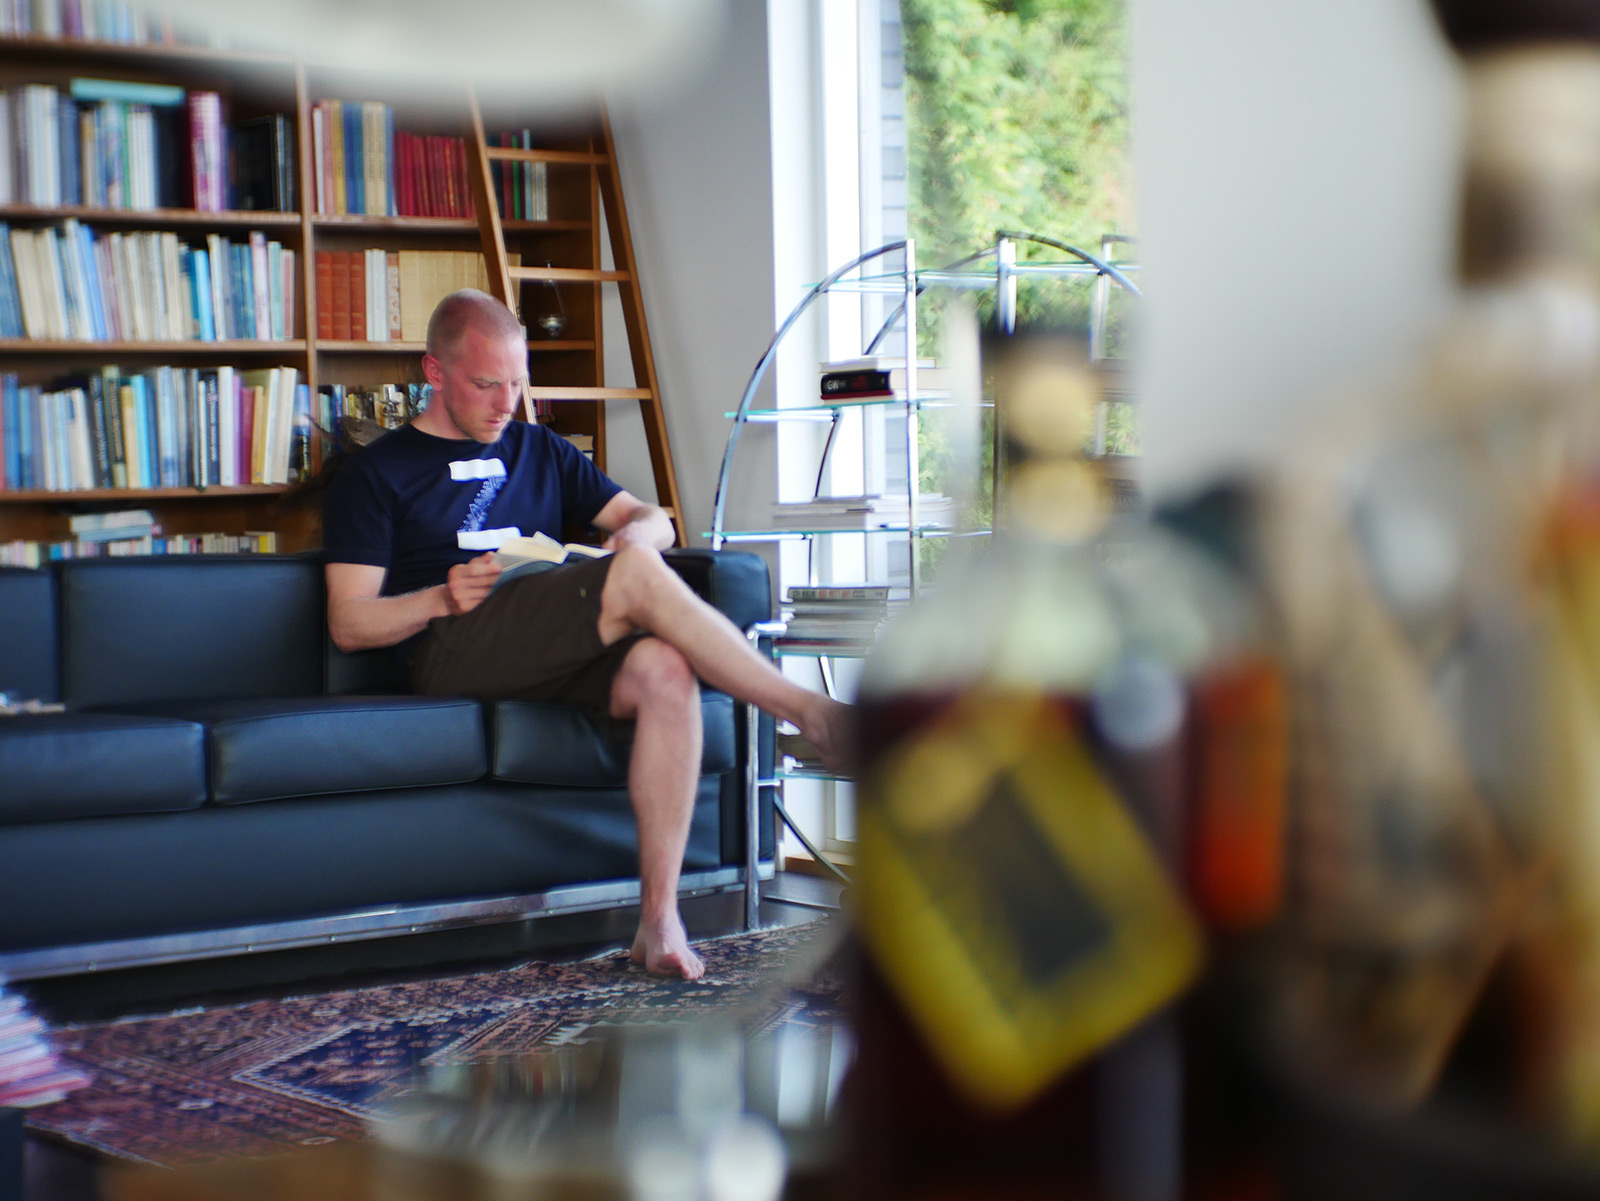 Bjorn reading at home.